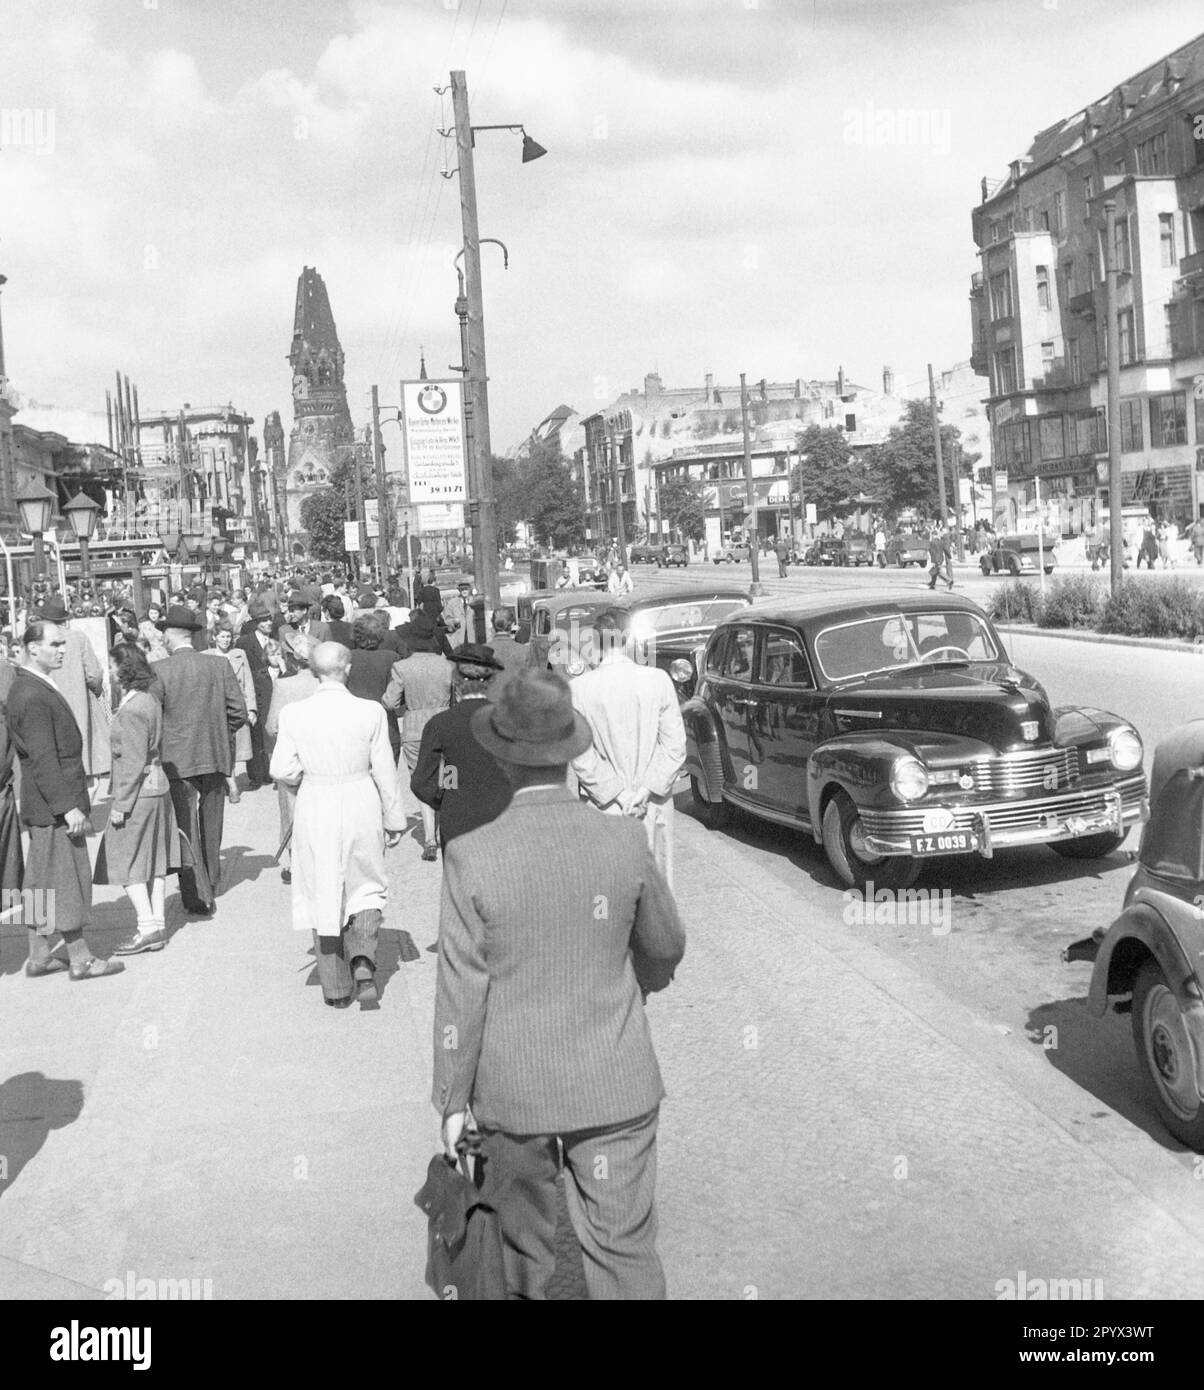 Undated photo of a sidewalk with flaneurs and buyers 1950 at the Kurfuerstendamm, British occupation zone, West Berlin, 1950. To the right and left of the street, partially destroyed facades. On the makeshift wooden lantern in the middle, an attached promotional poster of the Bavarian Motor Works. In the background, the ruined tower (Hohler Zahn) of the Kaiser Wilhelm Memorial Church. Stock Photo